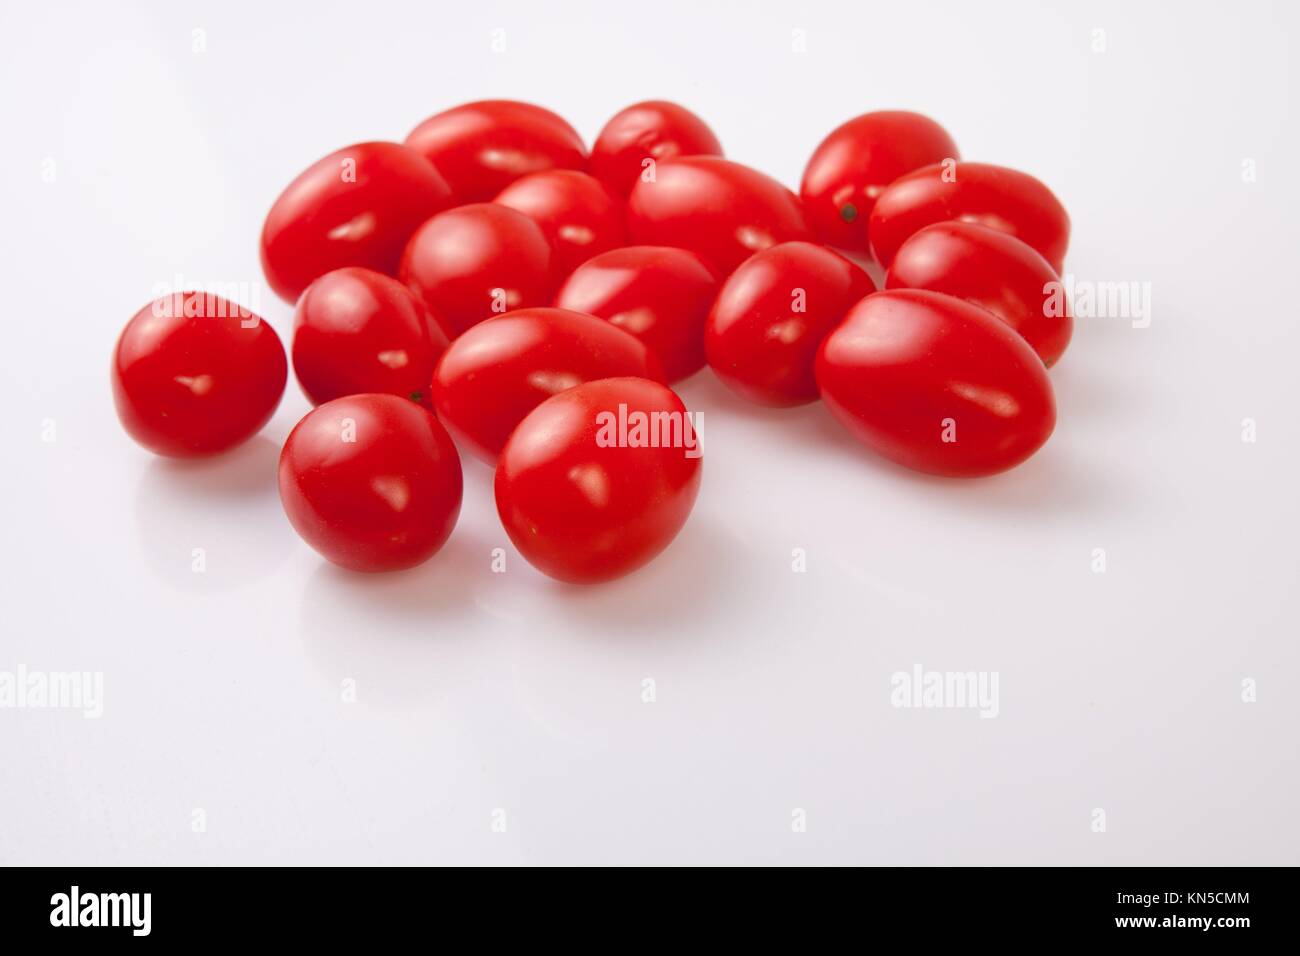 Handful of red shiny cherry tomatoes. Isolated over white background. Stock Photo